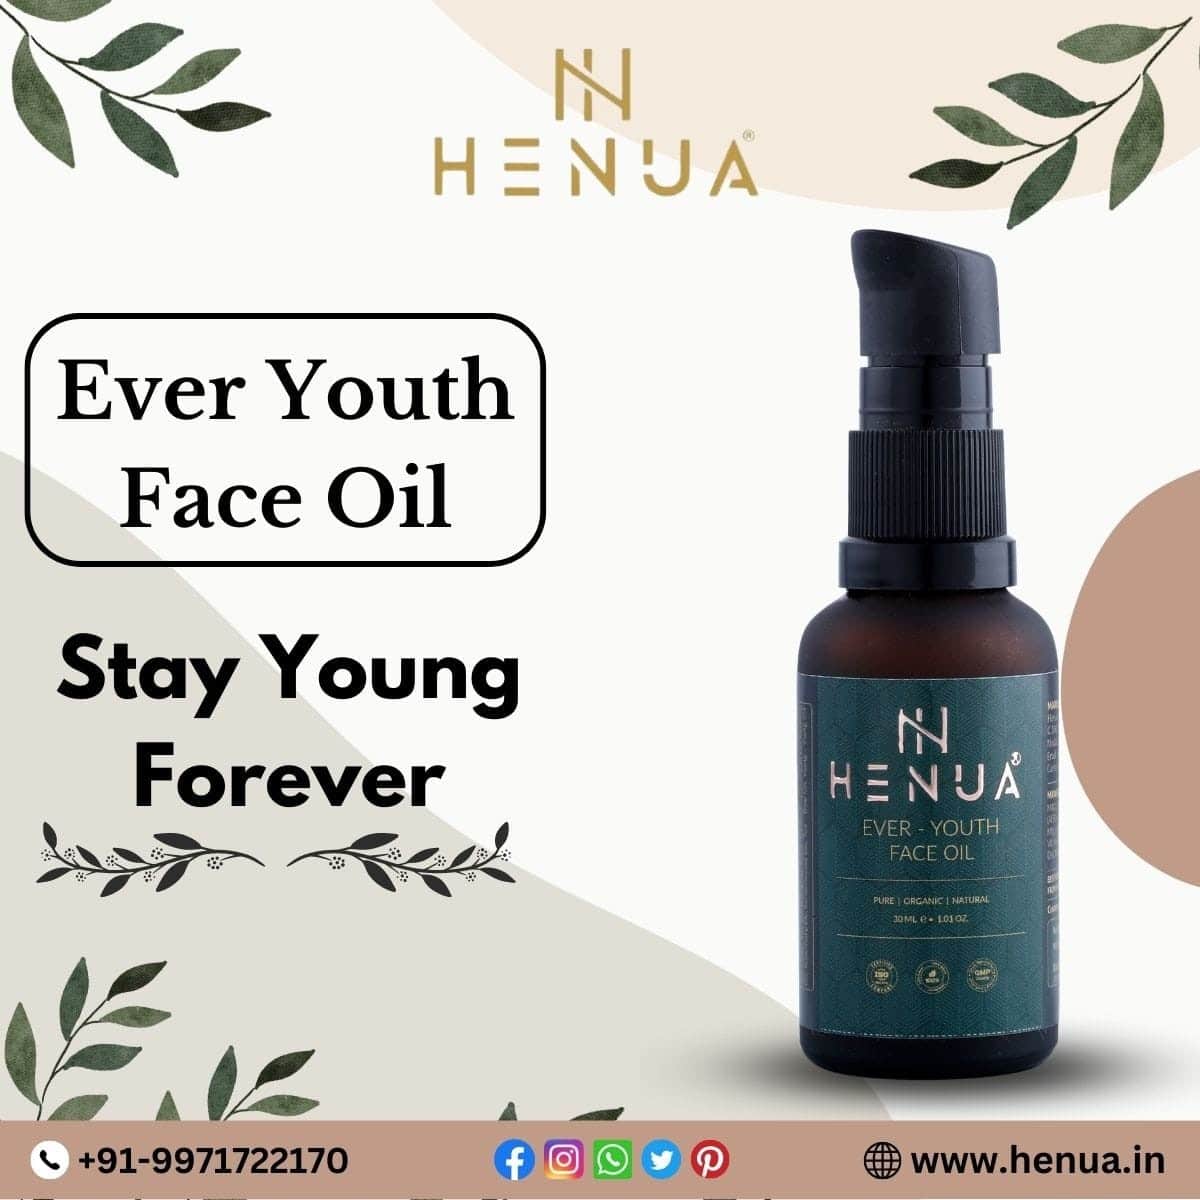 Stay-Young-Forever-With-Henua-Ever-Youth-Face-Oil